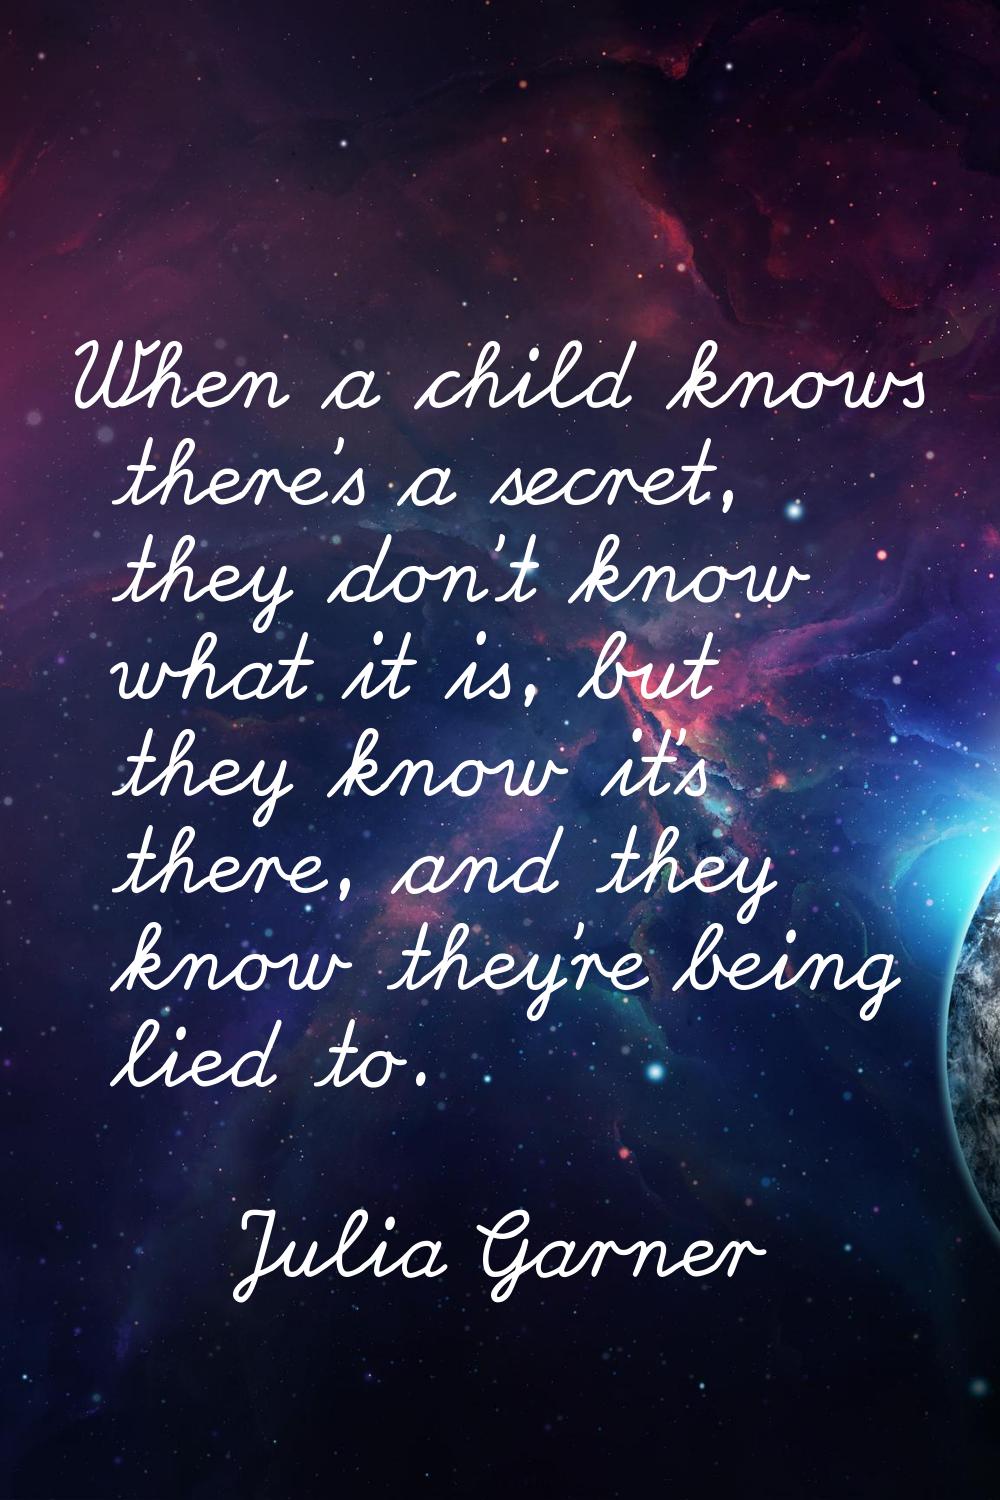 When a child knows there's a secret, they don't know what it is, but they know it's there, and they